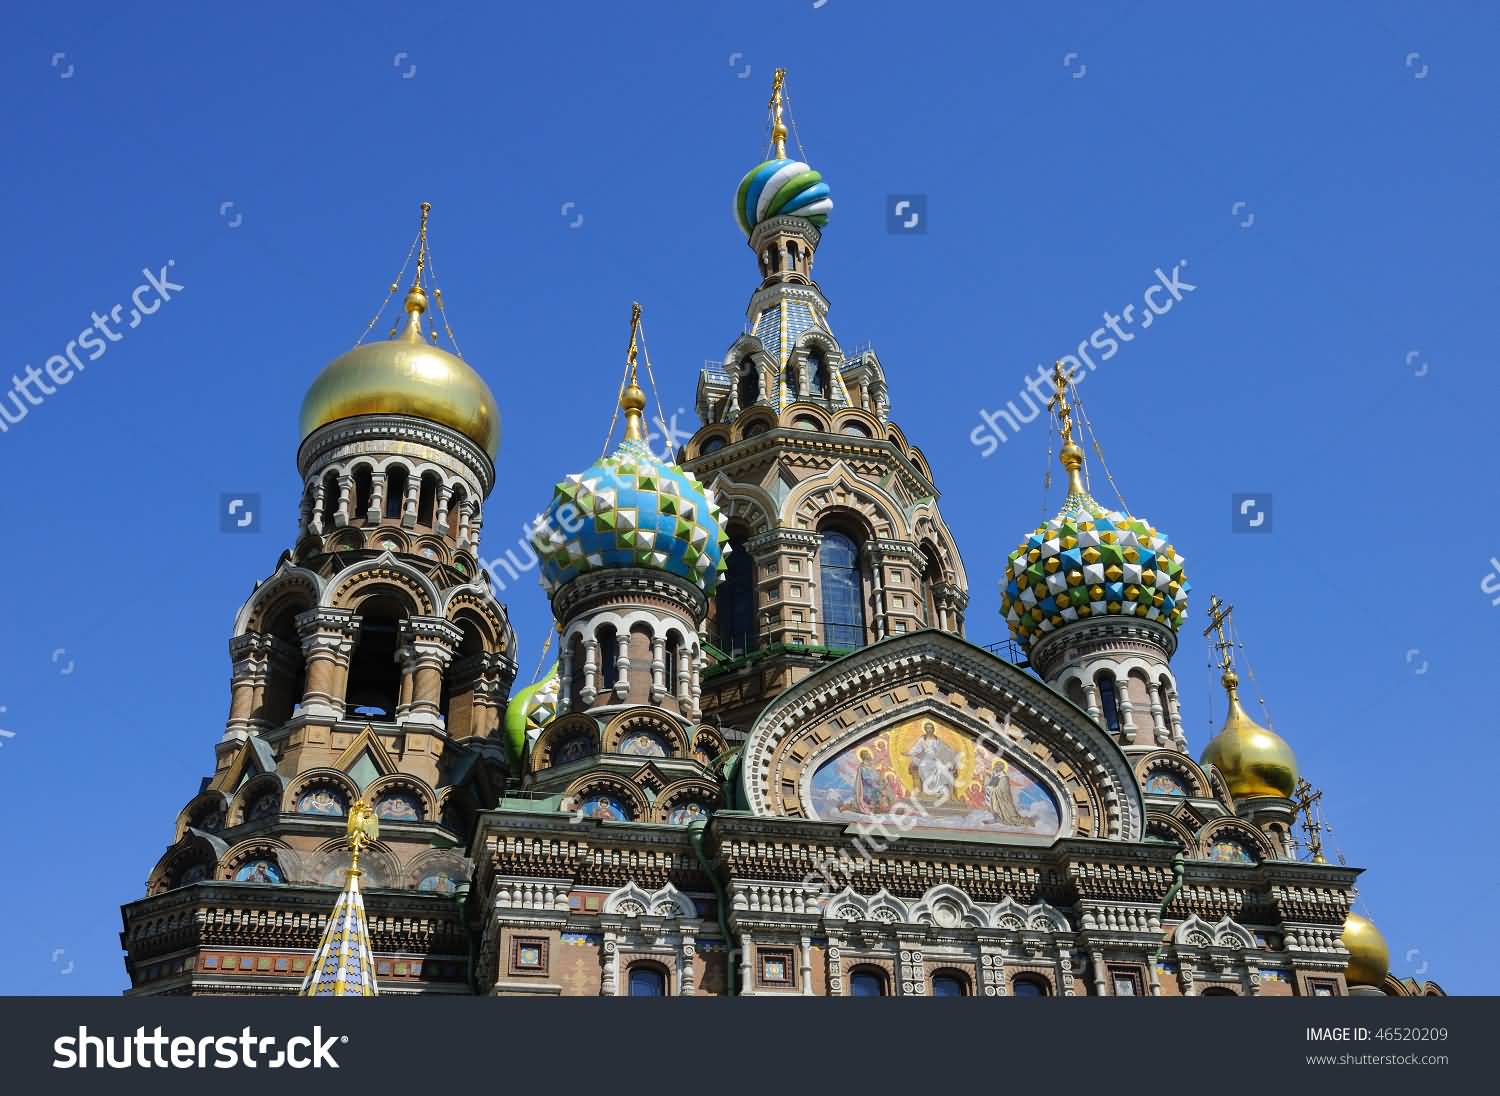 Onion Domes Of Church Of The Savior On Blood Closeup Picture